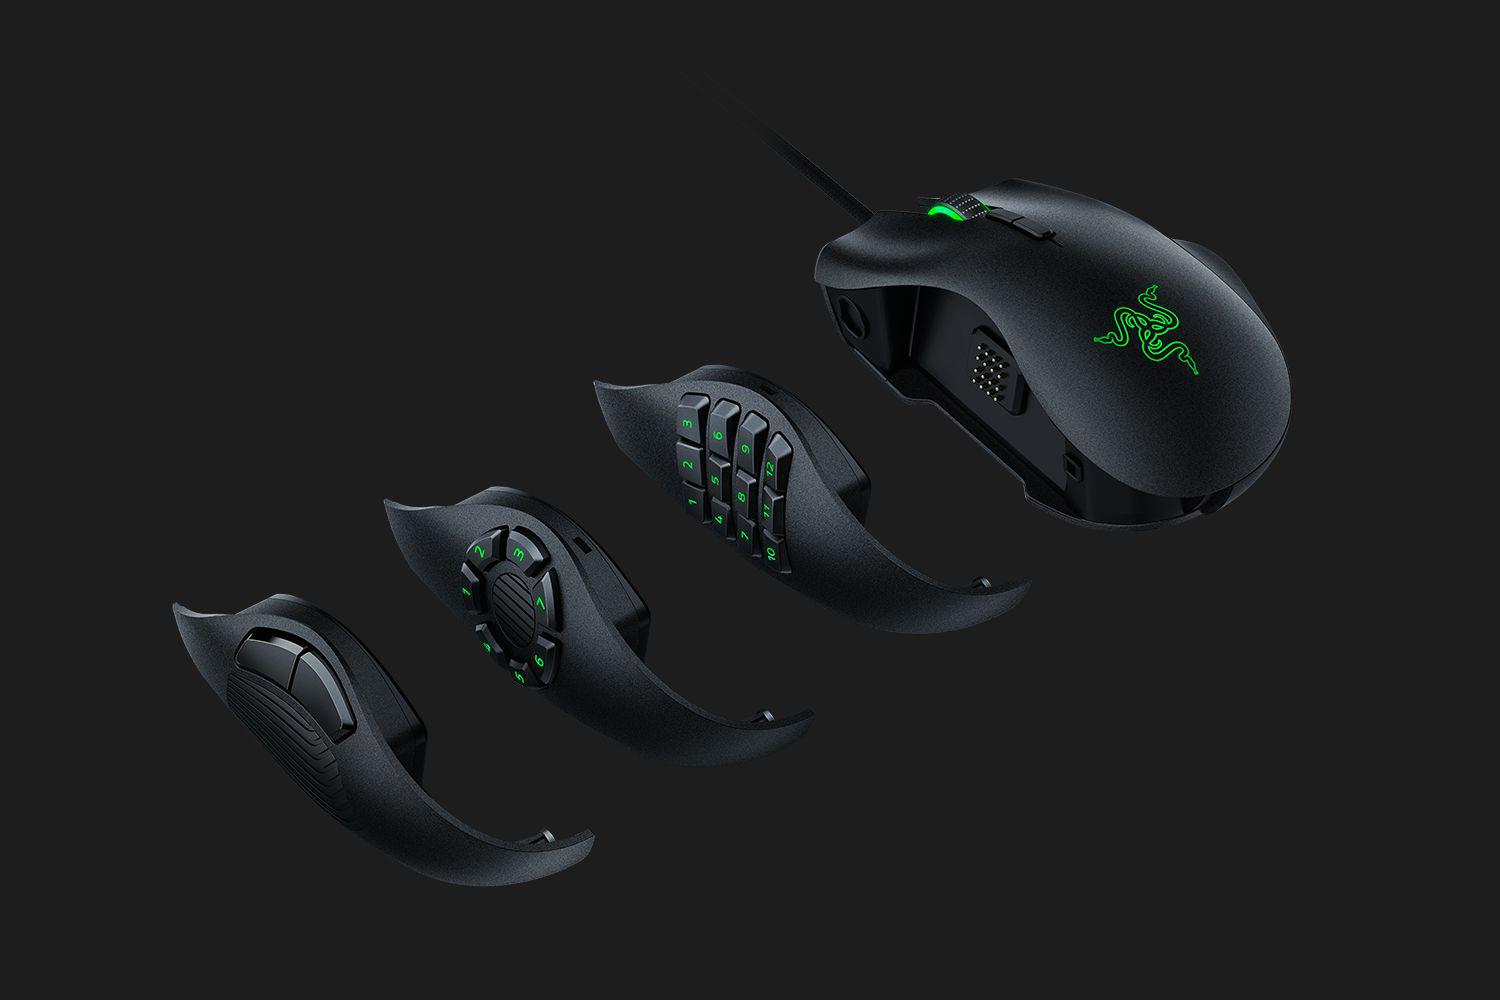 Mouse Razer, 5G optical sensor, Naga Trinity, 3 interchangeable side plates with 2, 7 and 12-button configurations, Up to 19 programmable buttons, 16000dpi,1000Hz Ultrapolling, Up to 450 inches per second/50 G acceleration, Razer Synapse 3 (Beta) enabled, Chroma lighting with 16.8 million